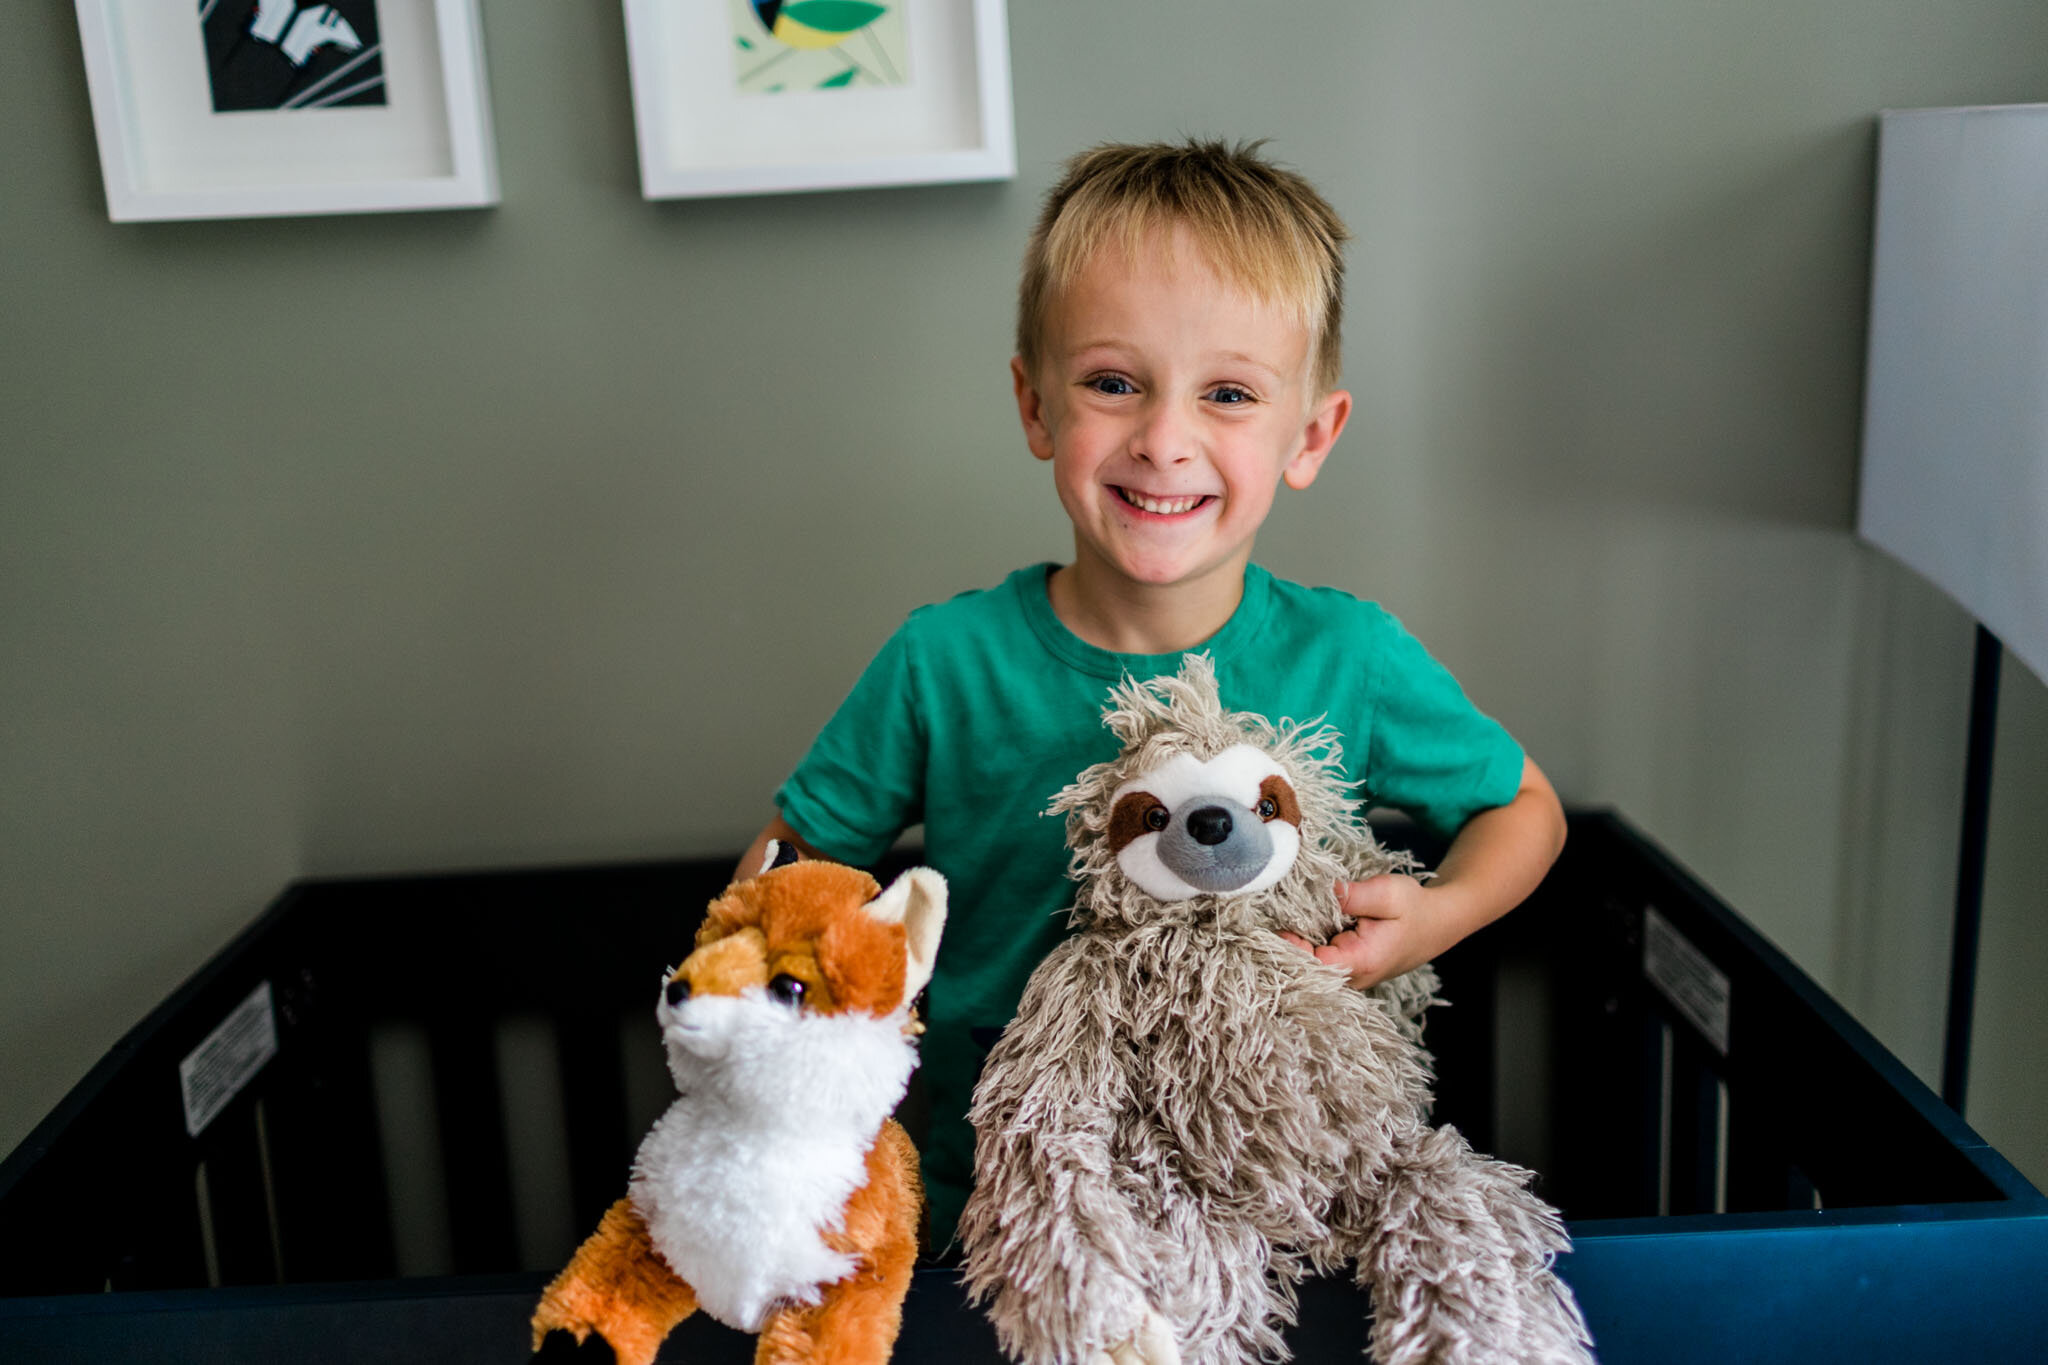 Durham Newborn Photographer | By G. Lin Photography | boy holding stuffed animals and smiling at camera